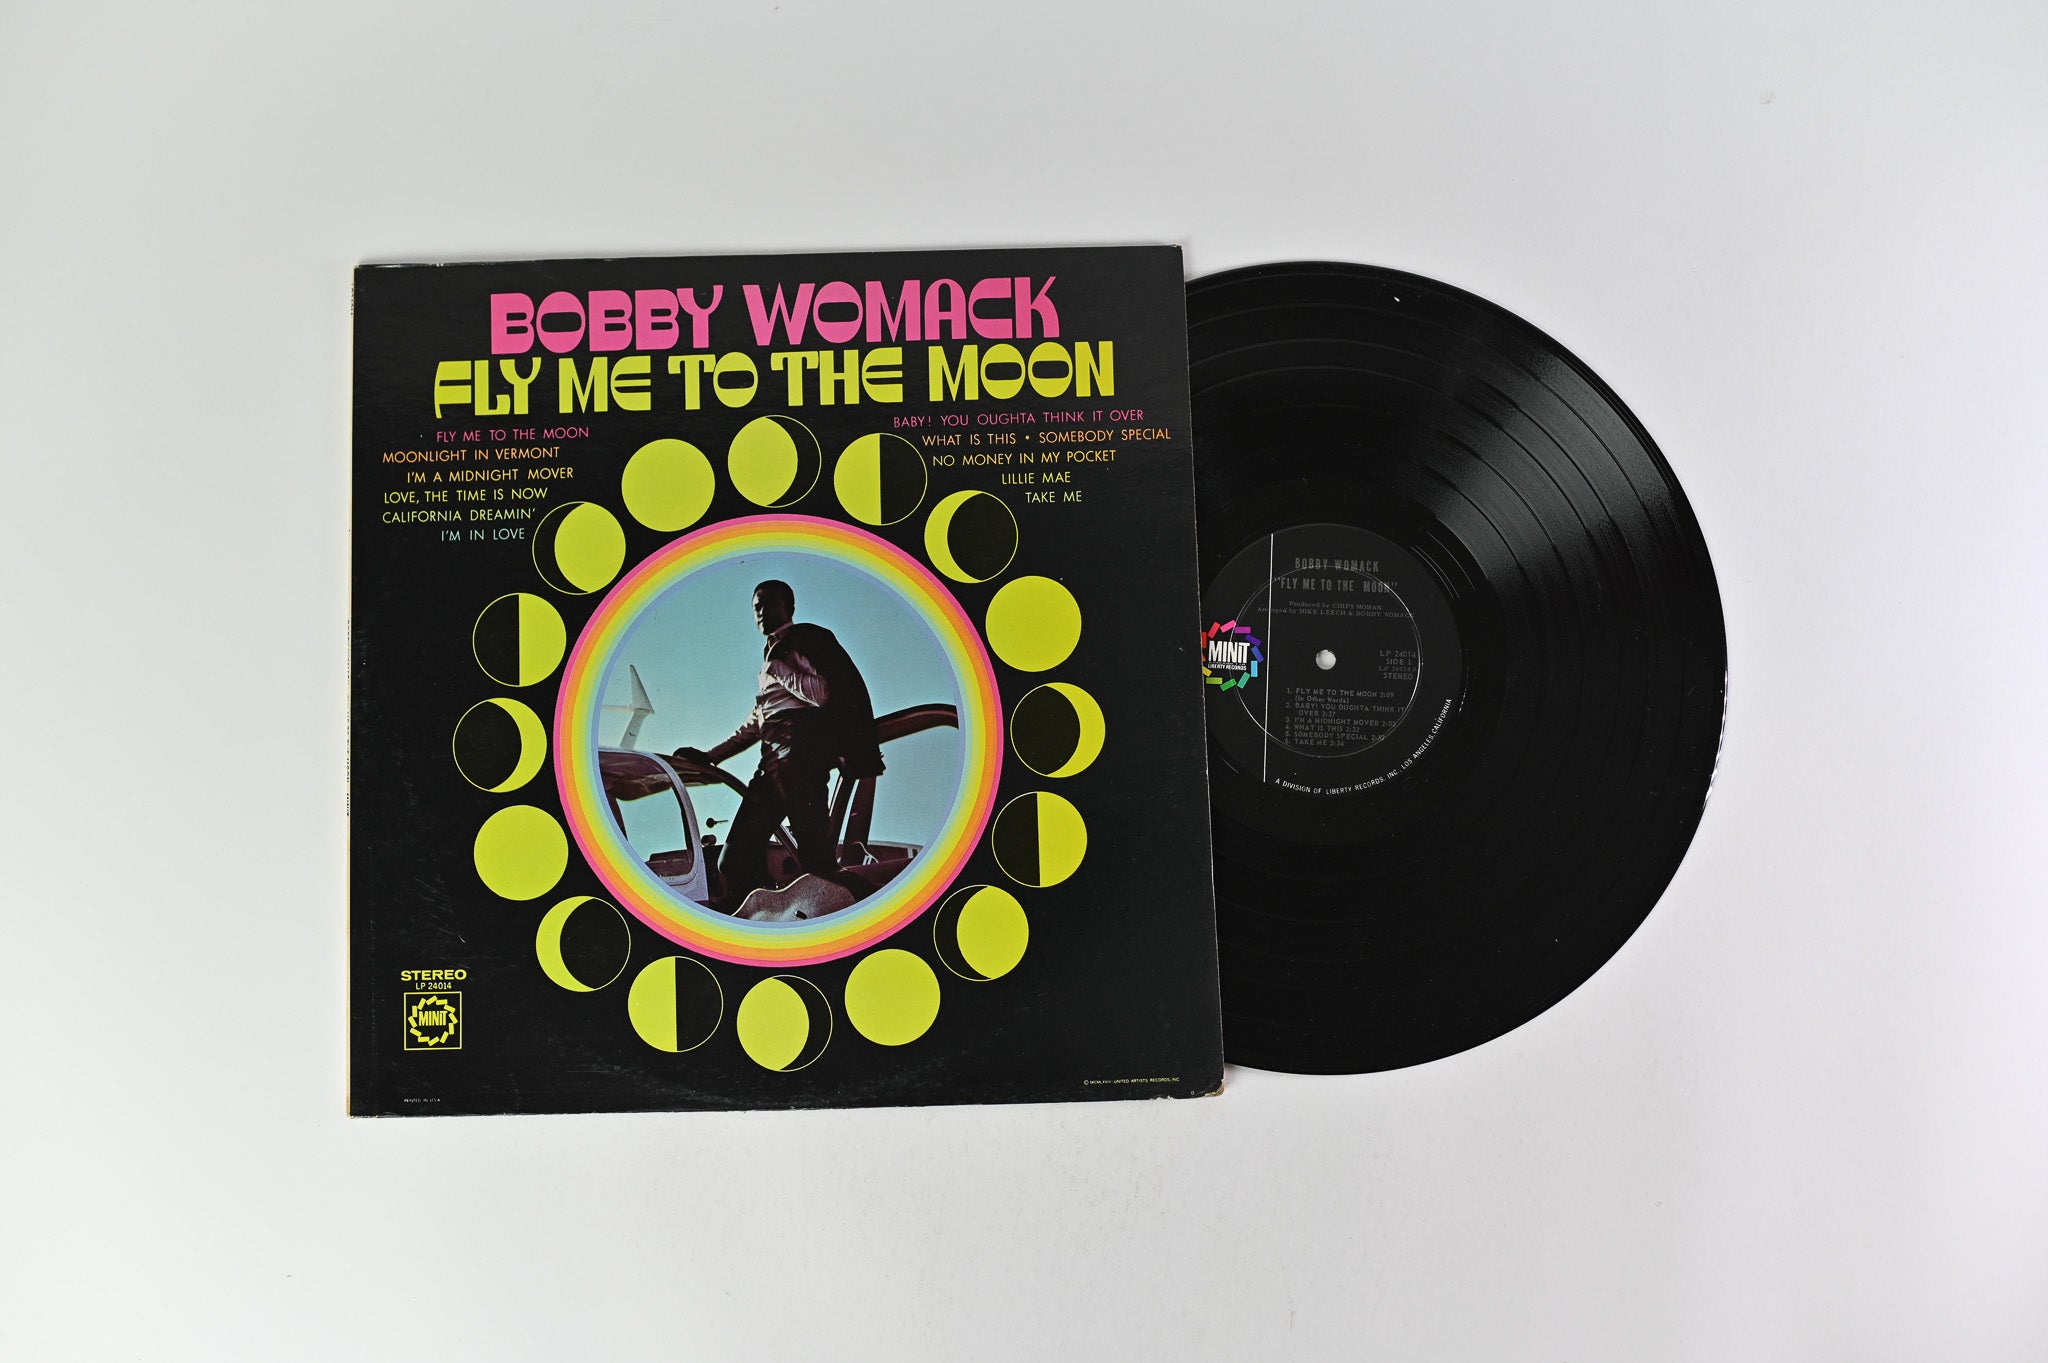 Bobby Womack - Fly Me To The Moon on Minit